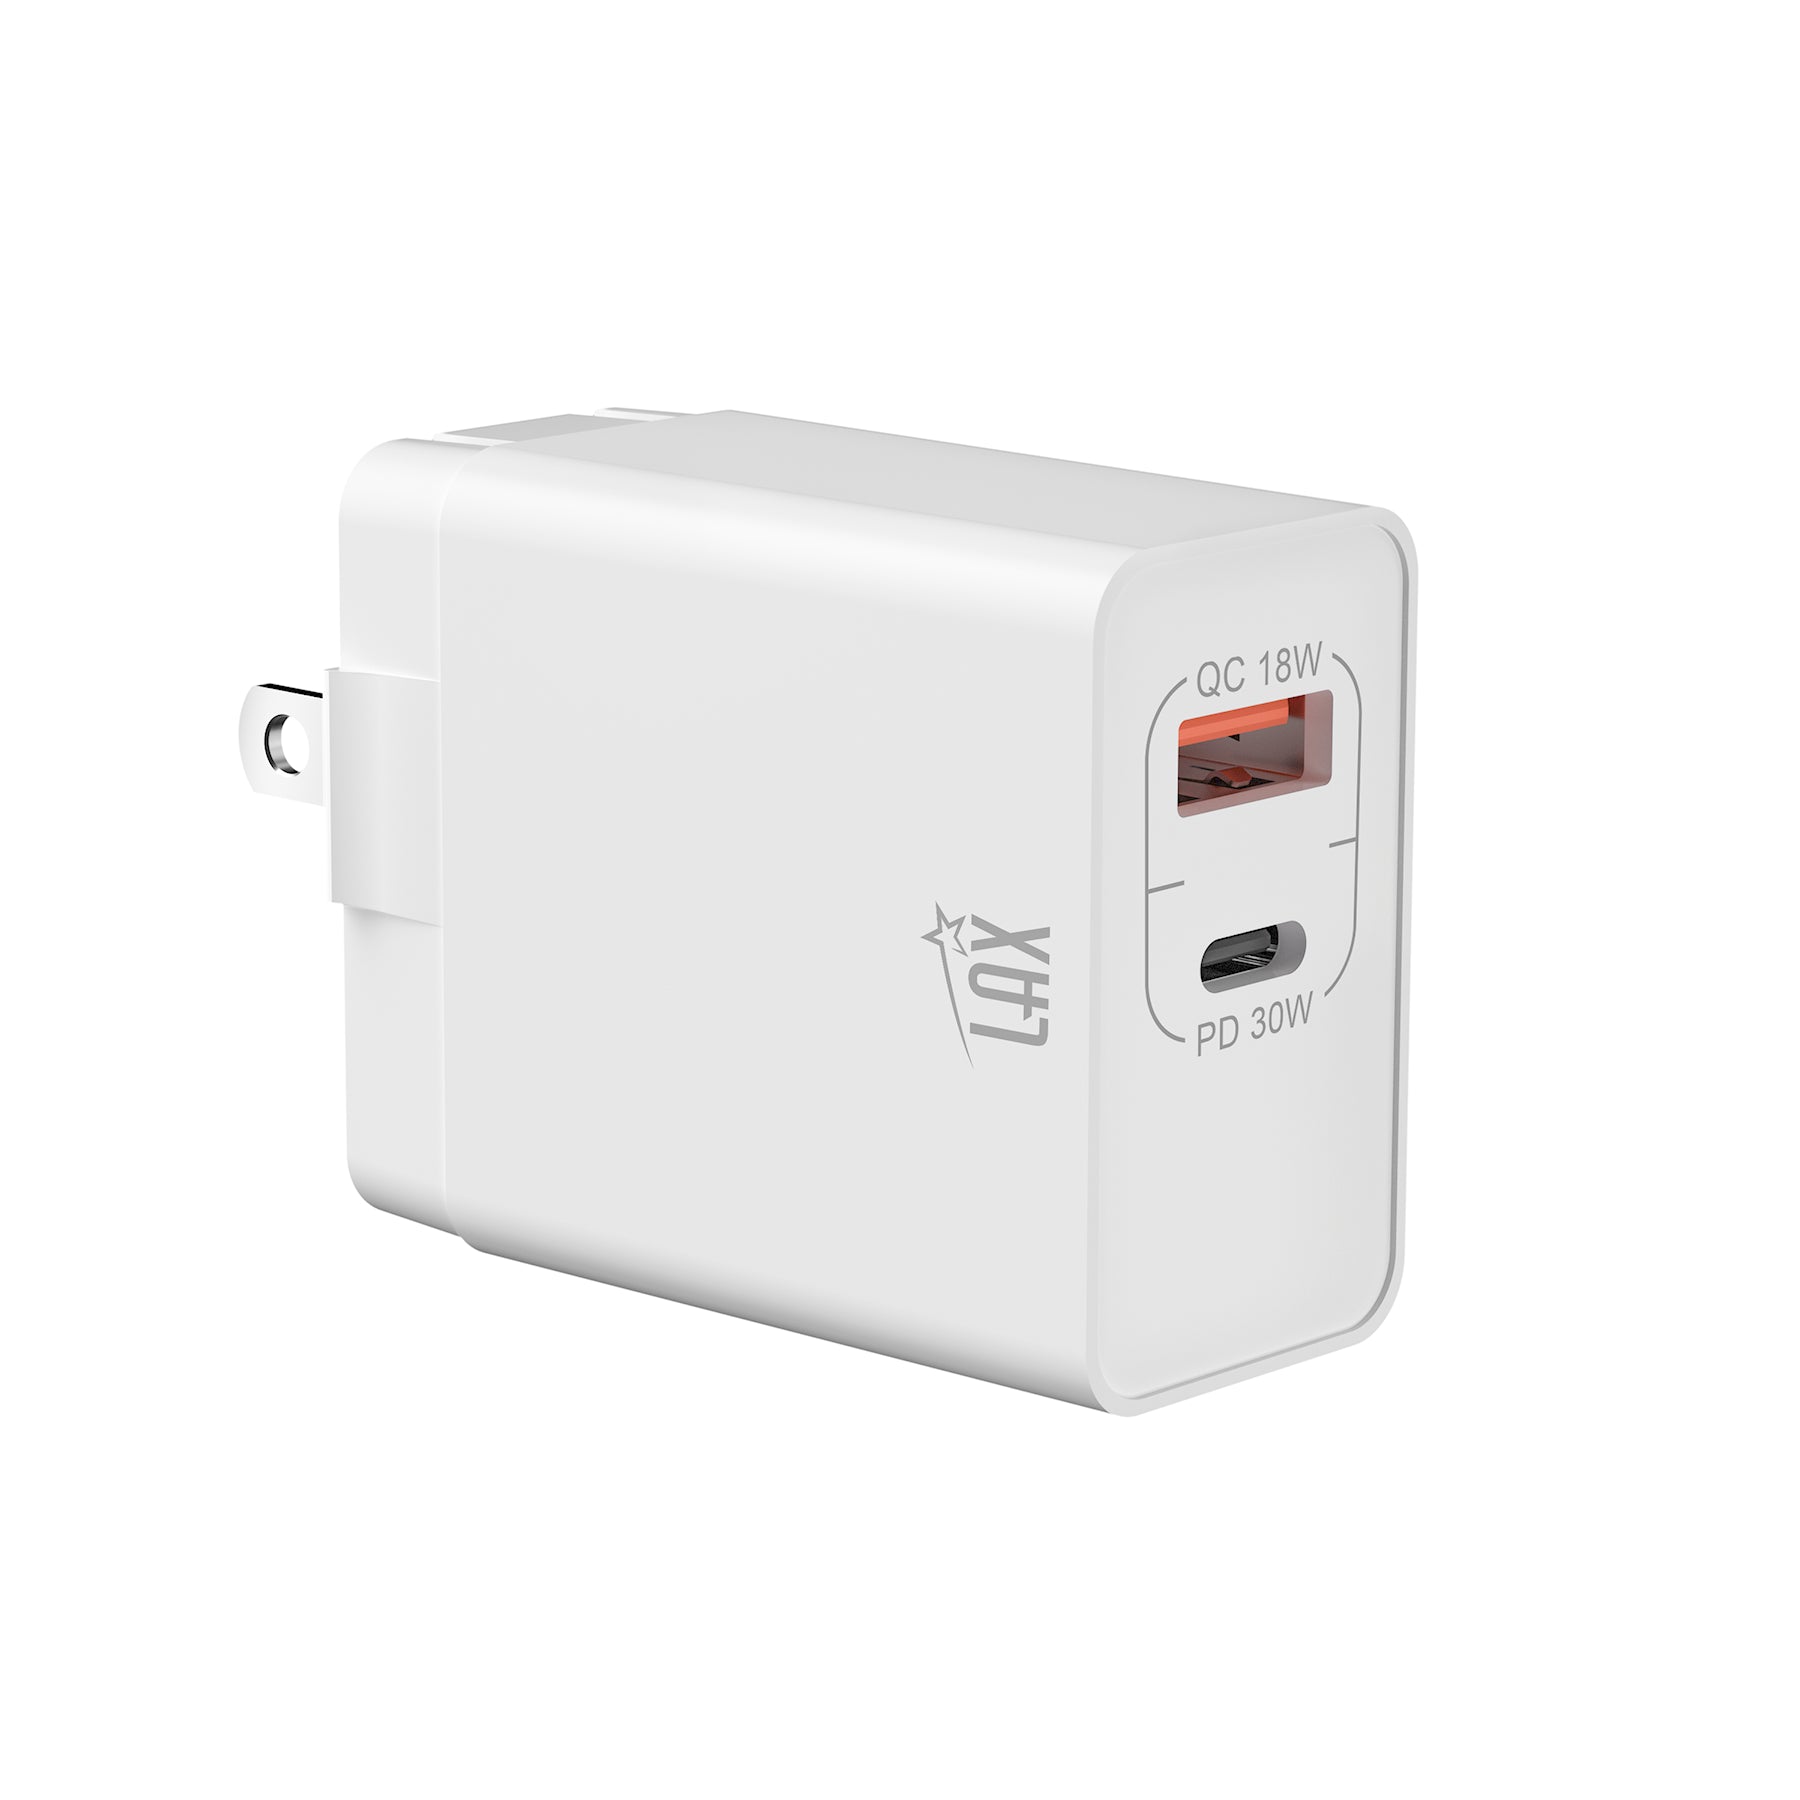 USB-C Mini Charger - 30W Power Adapter - Journey